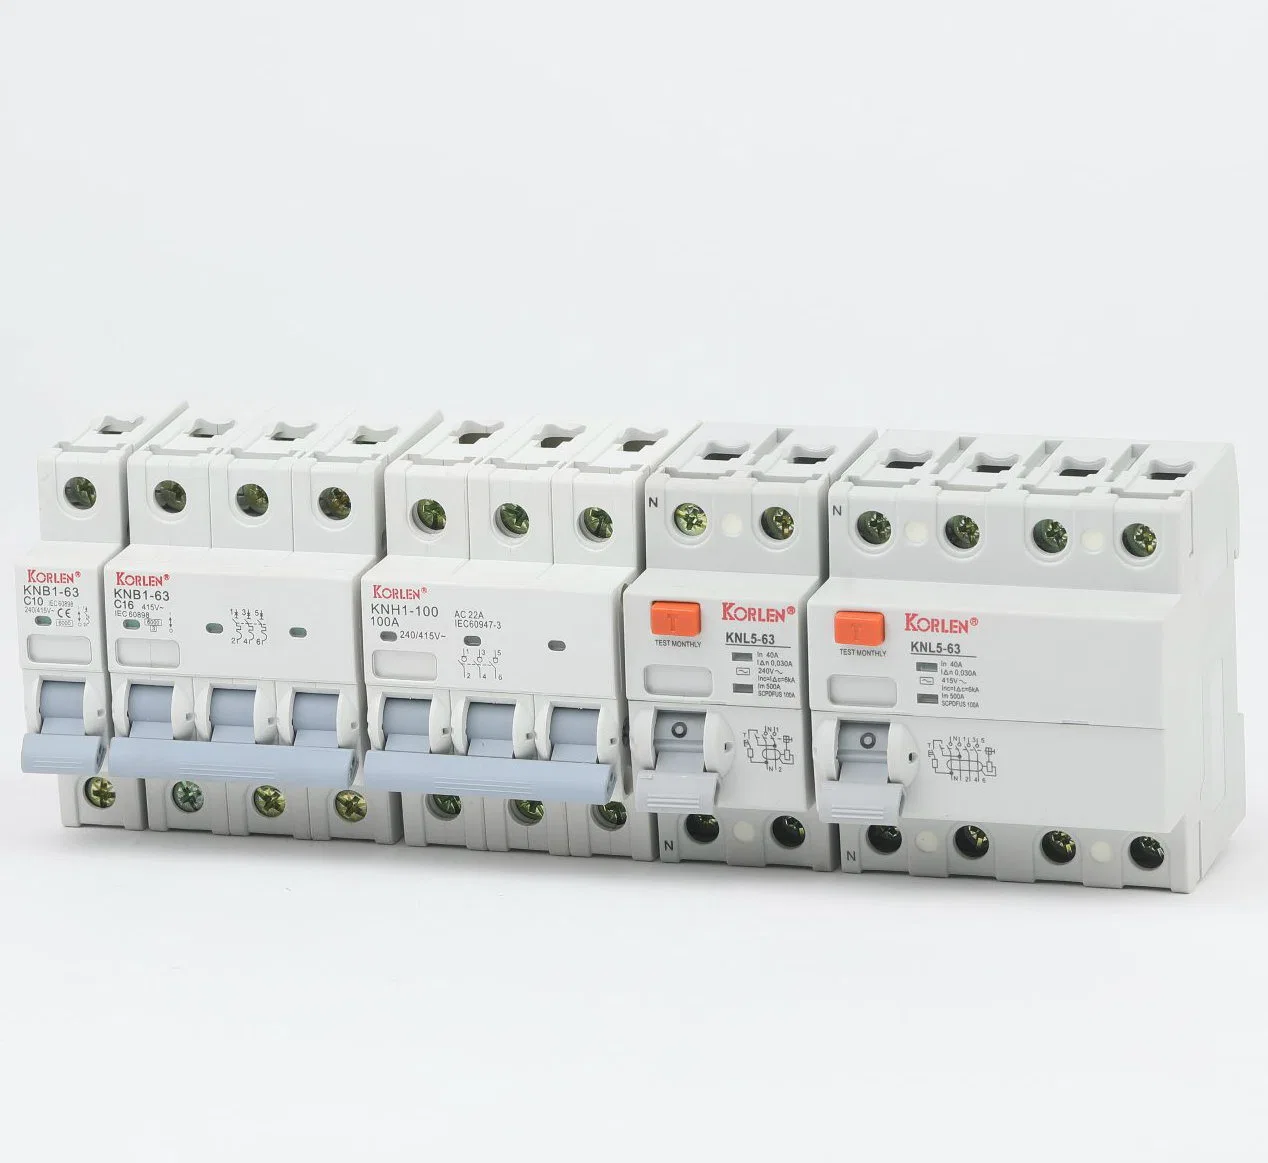 Prevent Personal Electric Shock Residual Current Circuit Breaker Knl5-63